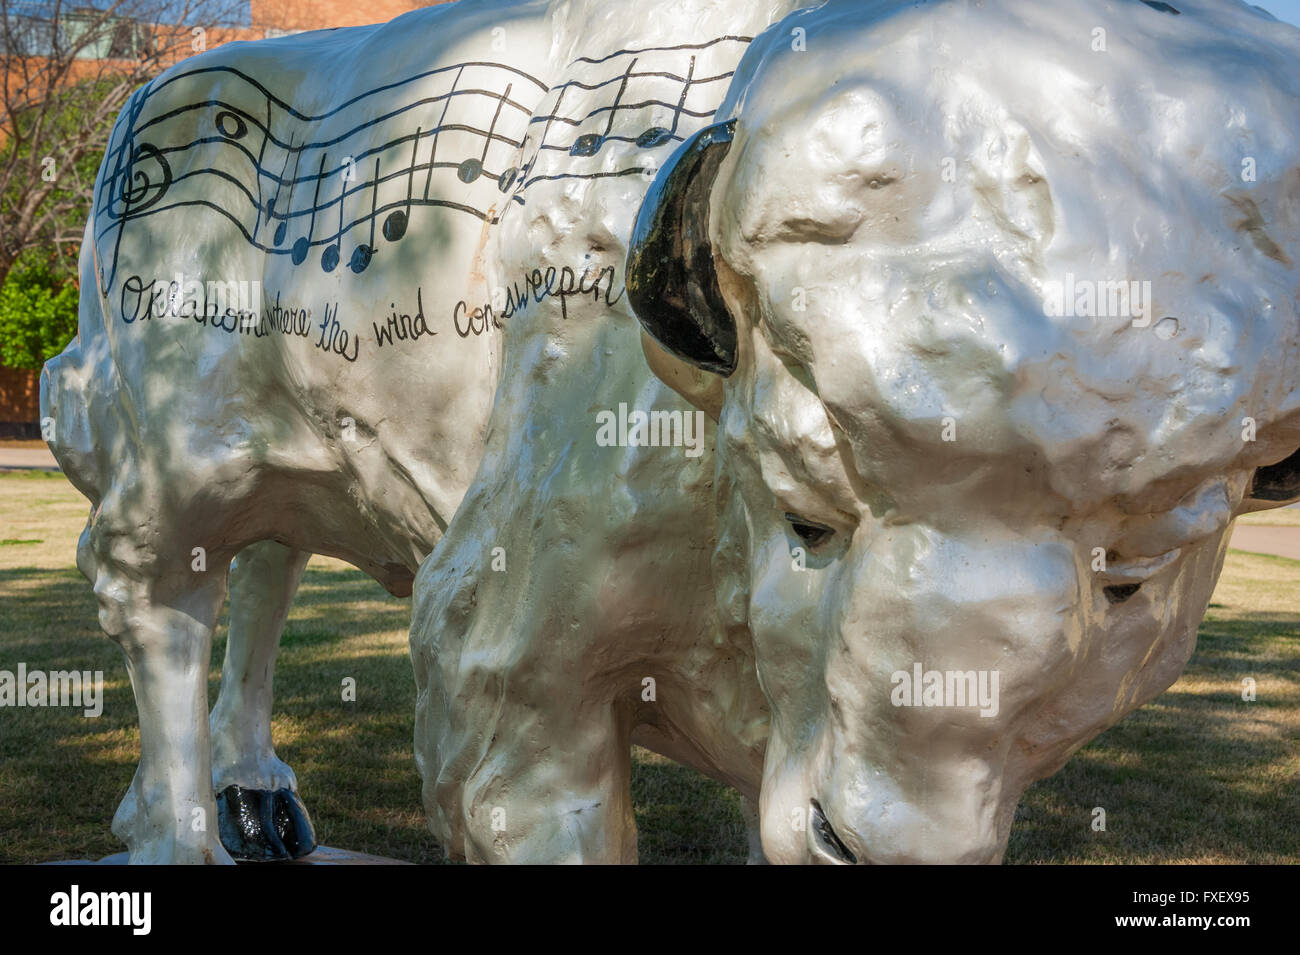 Amadeus, a painted buffalo sculpture in Bartlesville, Oklahoma is part of the city's 'Buffalo Stampede' public art project. Stock Photo